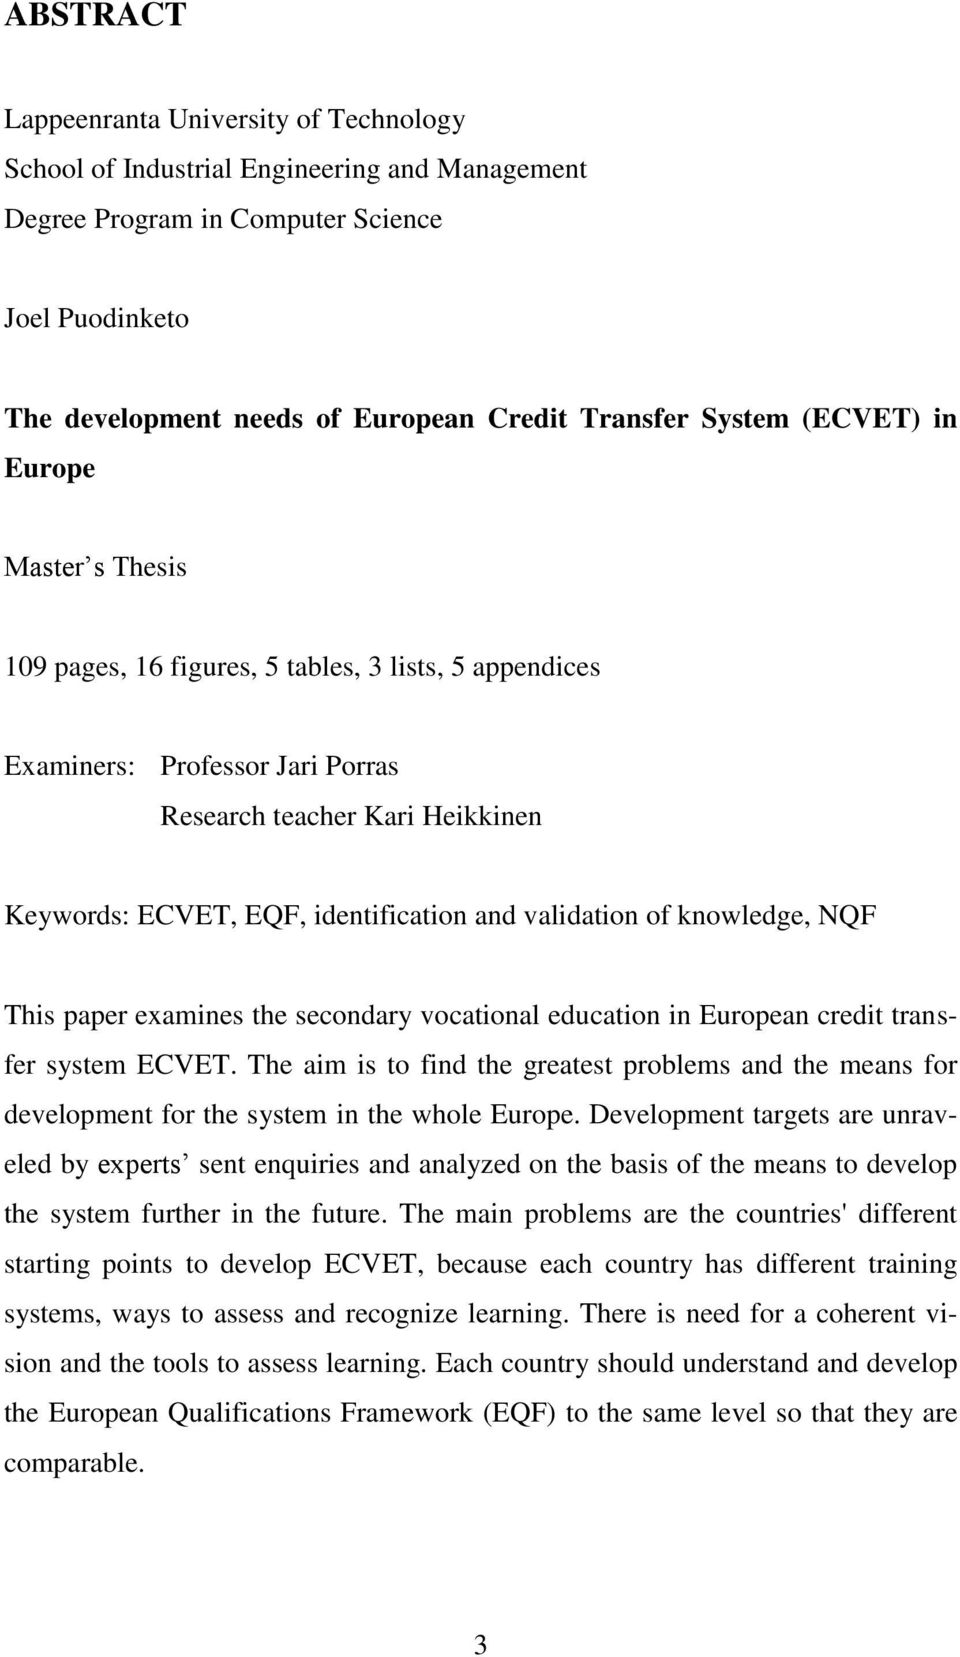 and validation of knowledge, NQF This paper examines the secondary vocational education in European credit transfer system ECVET.